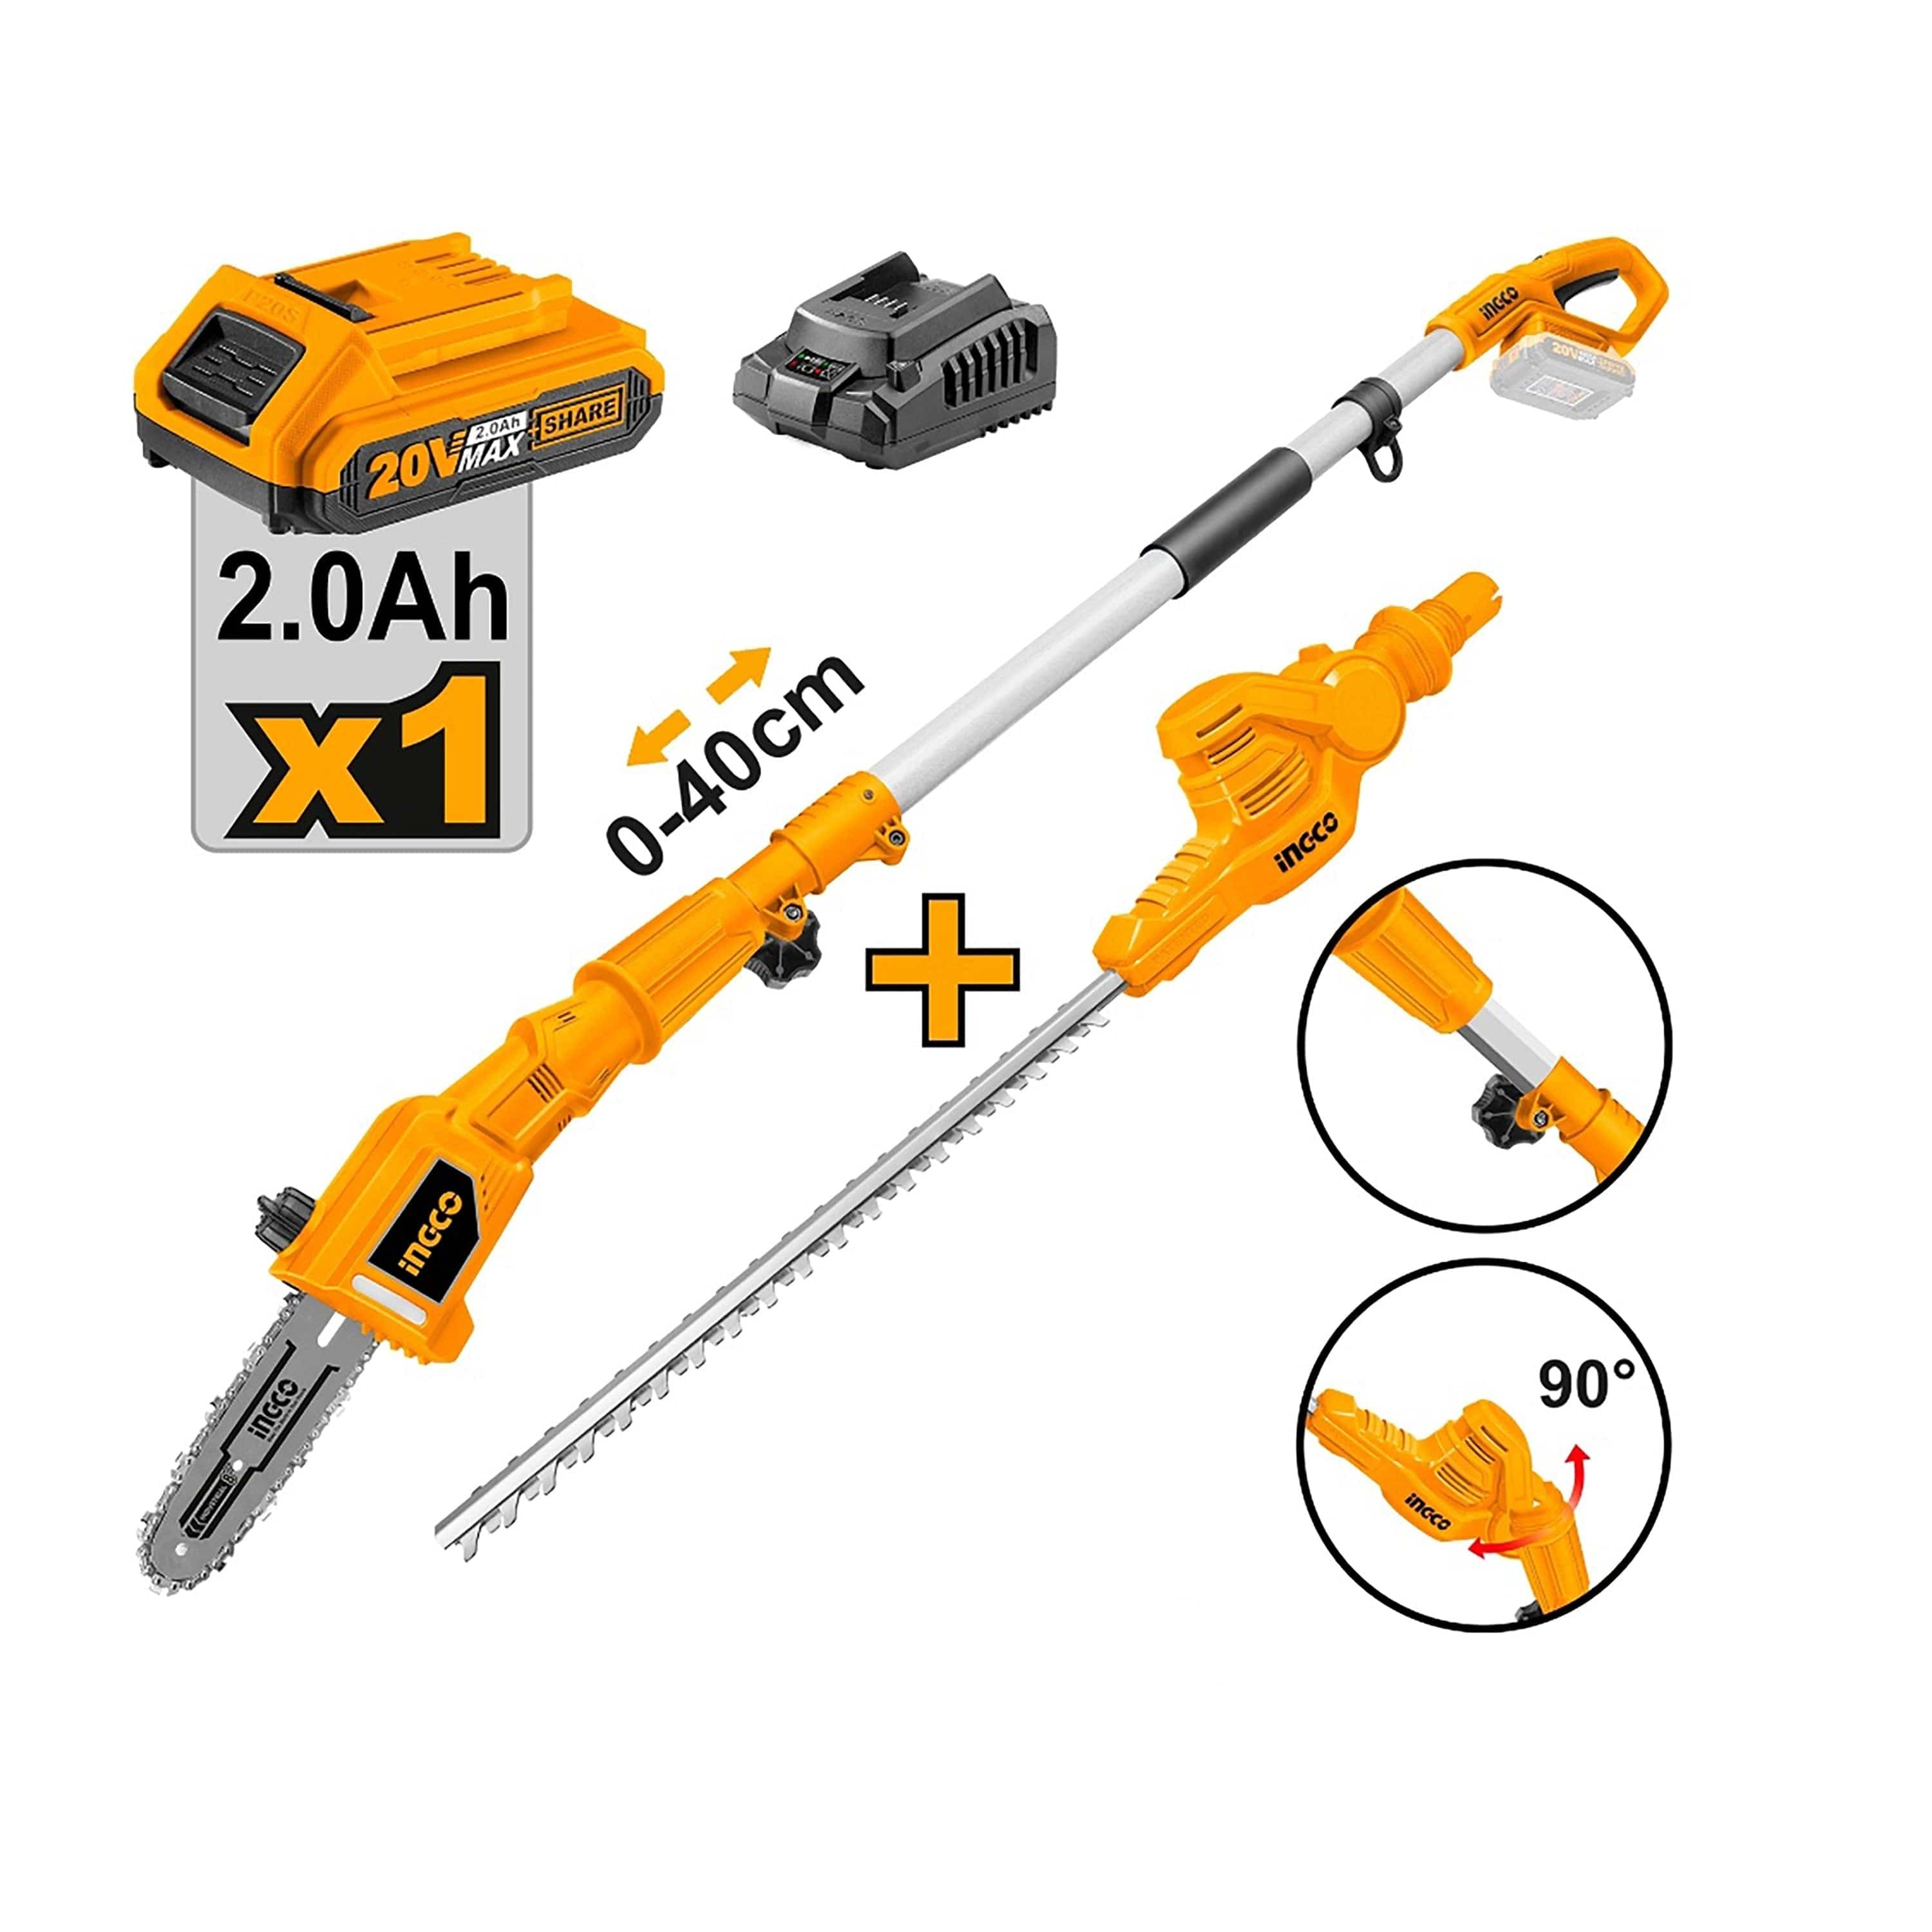 Buy Ingco Lithium-Ion Cordless Pole Saw with Pole Hedge Trimmer 20V 2.0Ah - CSTLI20018 | Shop at Supply Master Accra, Ghana Trimmer Buy Tools hardware Building materials